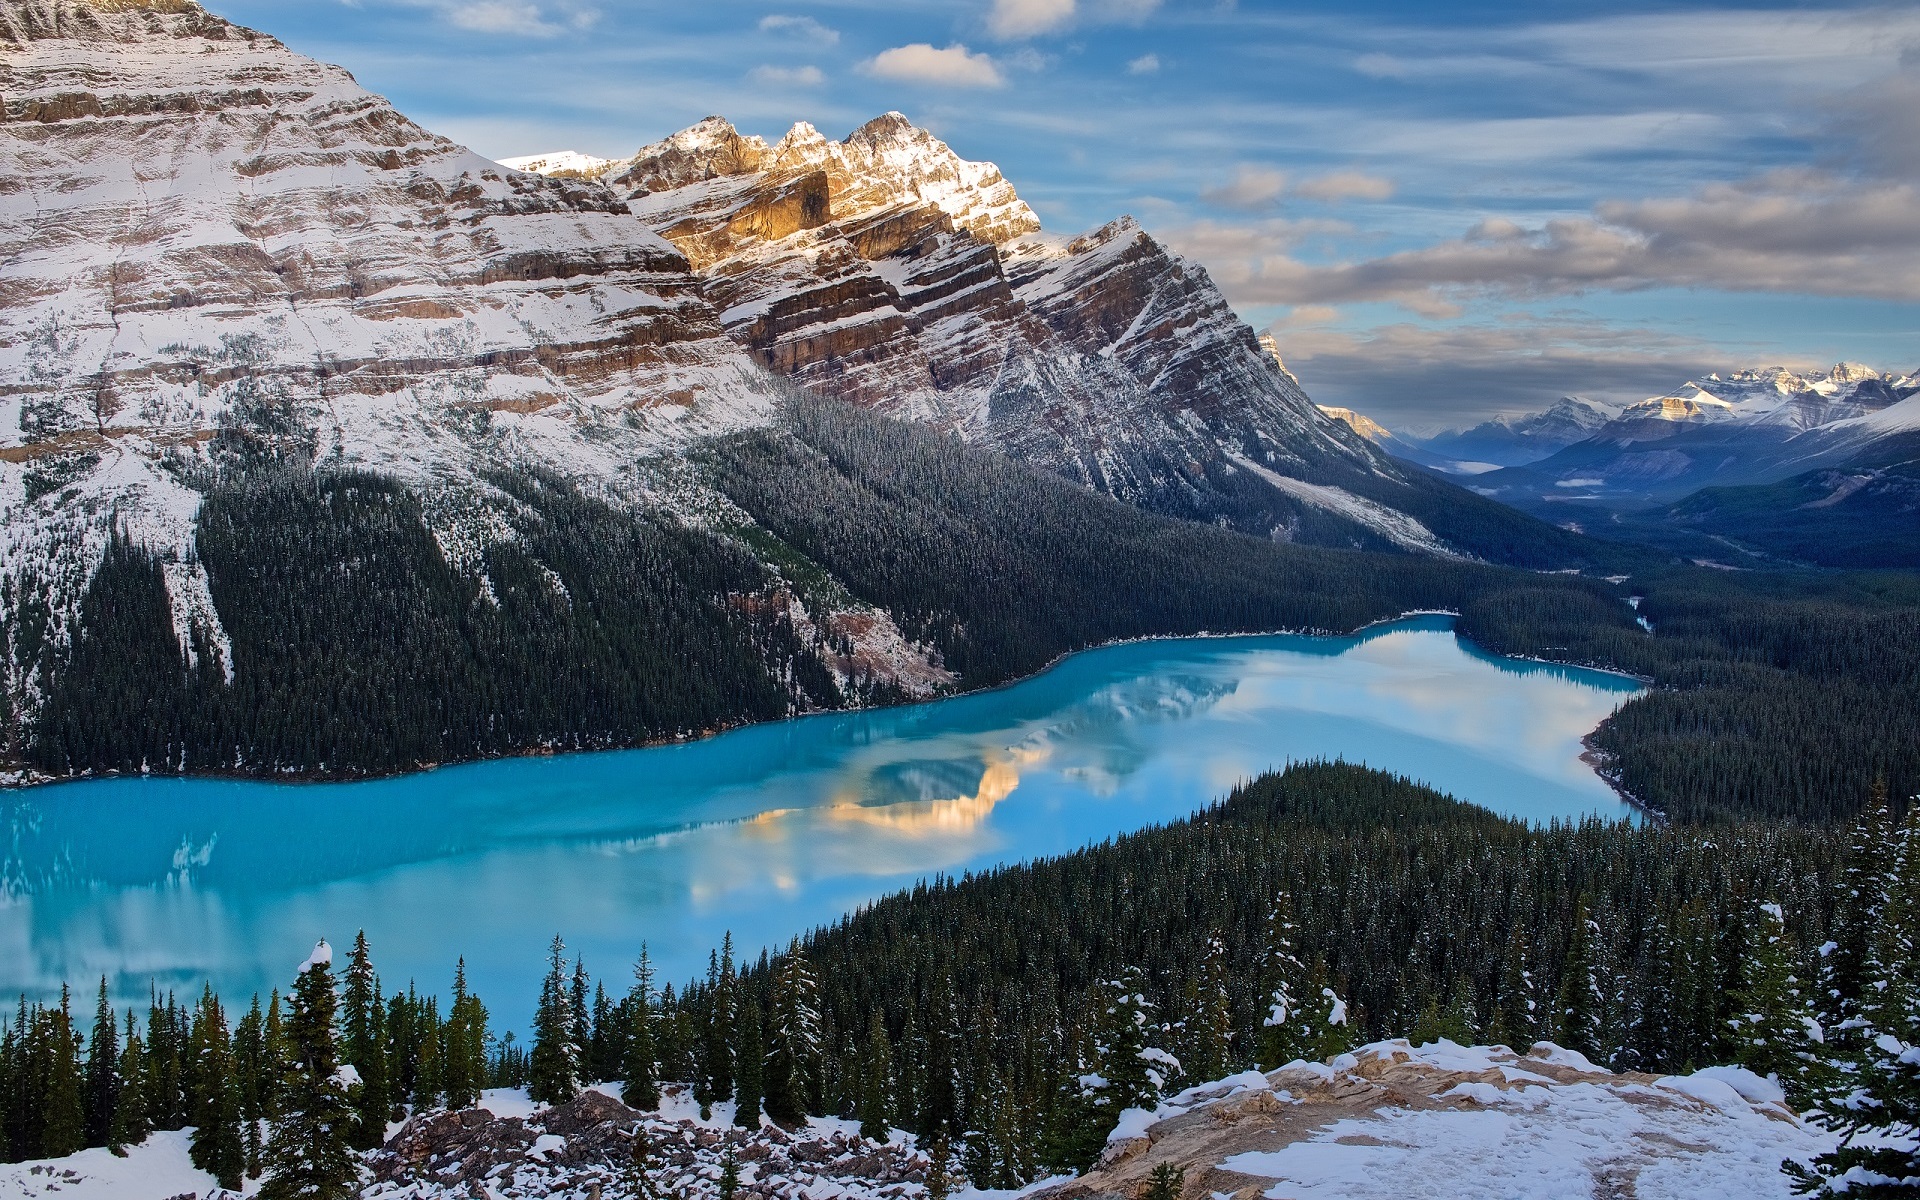 General 1920x1200 Peyto Lake Canada nature landscape mountains snowy mountain lake turquoise forest trees snowy peak snow winter far view pine trees cyan